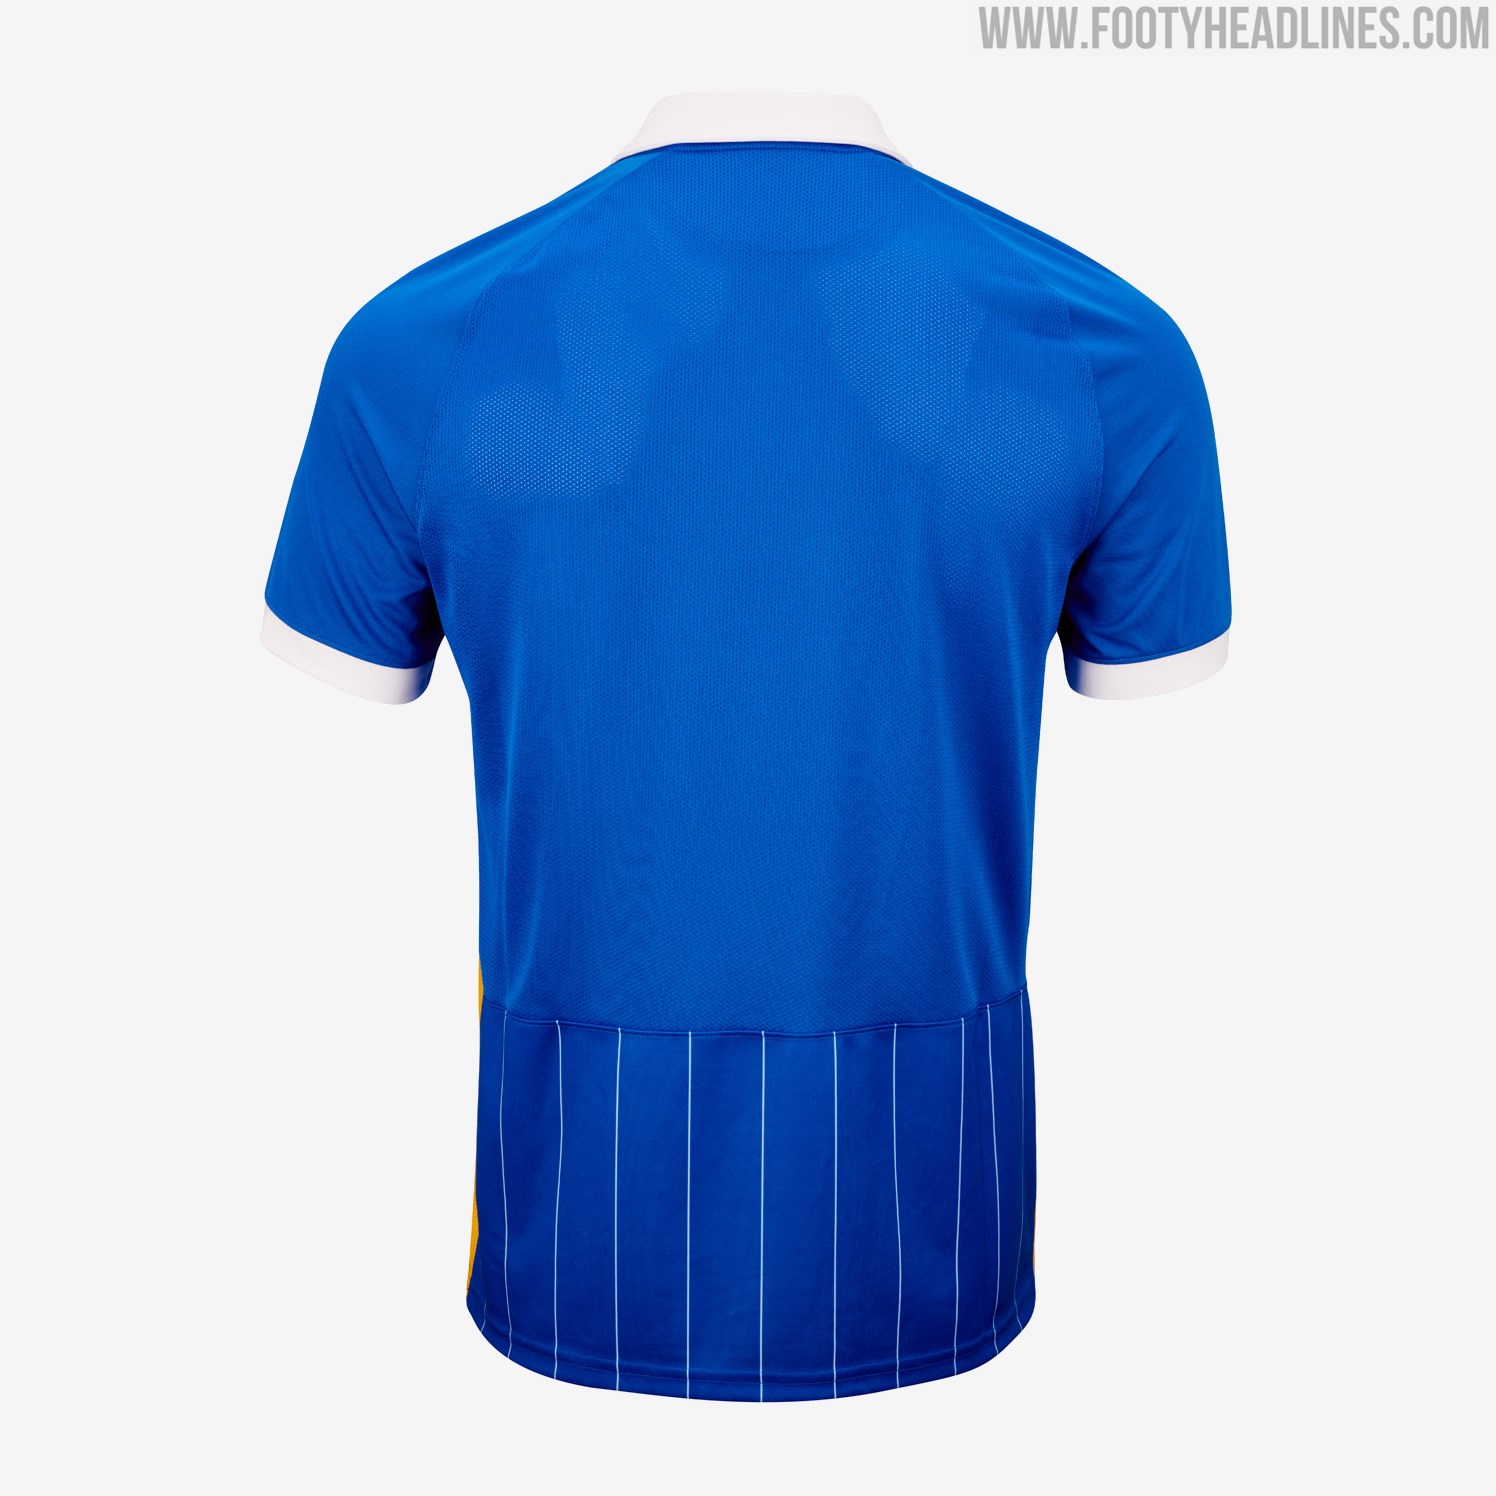 Brighton & Hove Albion 20-21 Home Kit Released - Footy Headlines